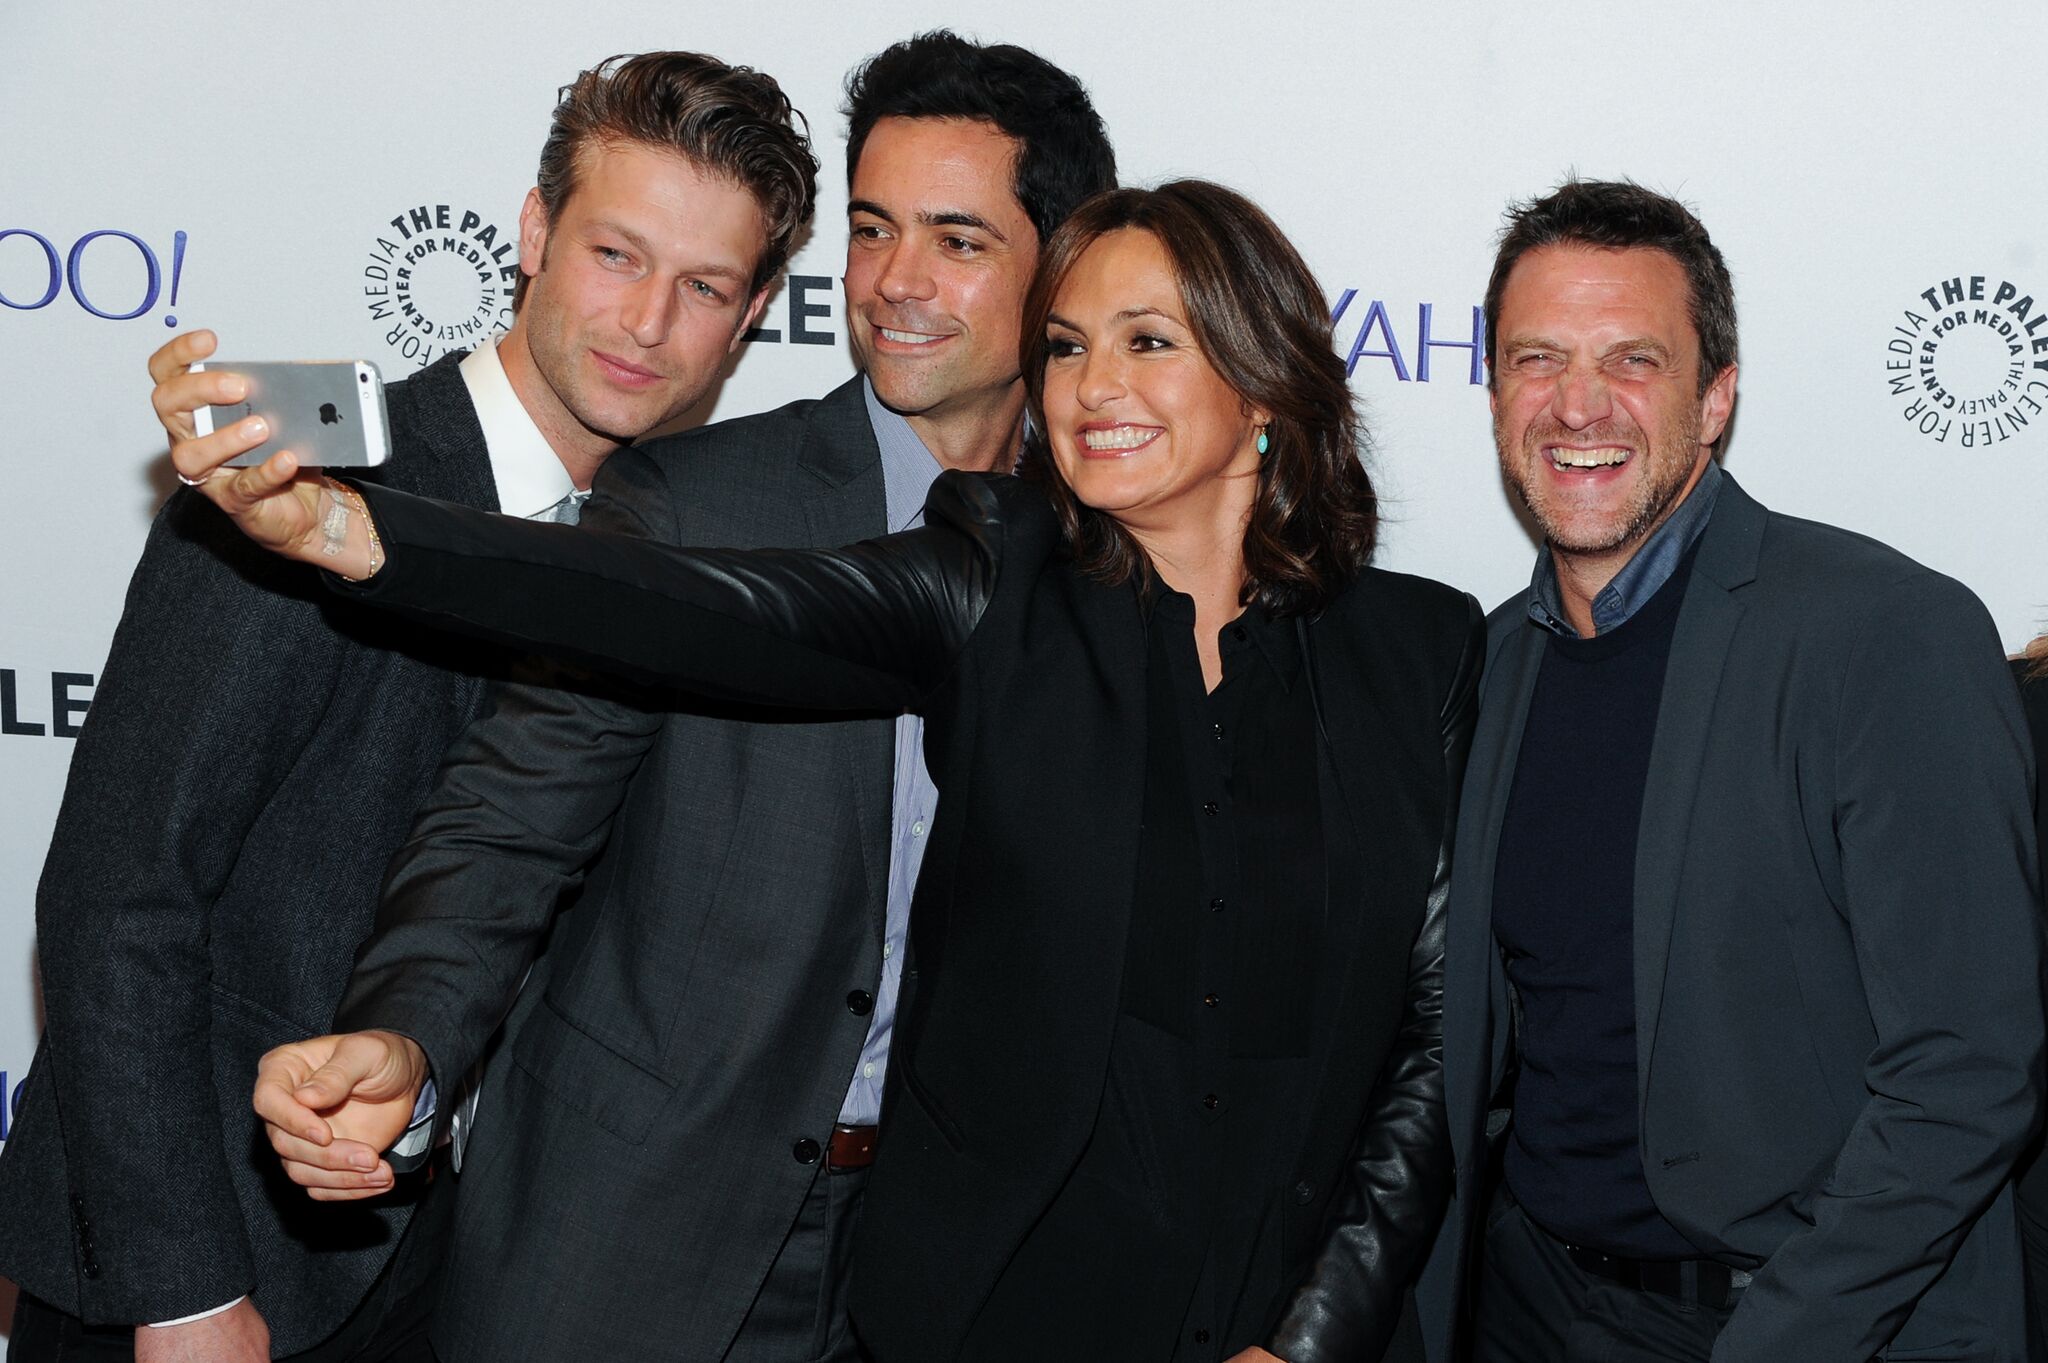 Peter Scanavino, Danny Pino, Mariska Hargitay and Raul Esparza attend the 2nd Annual Paleyfest New York Presents; Law & Order: SVU" | Getty Images